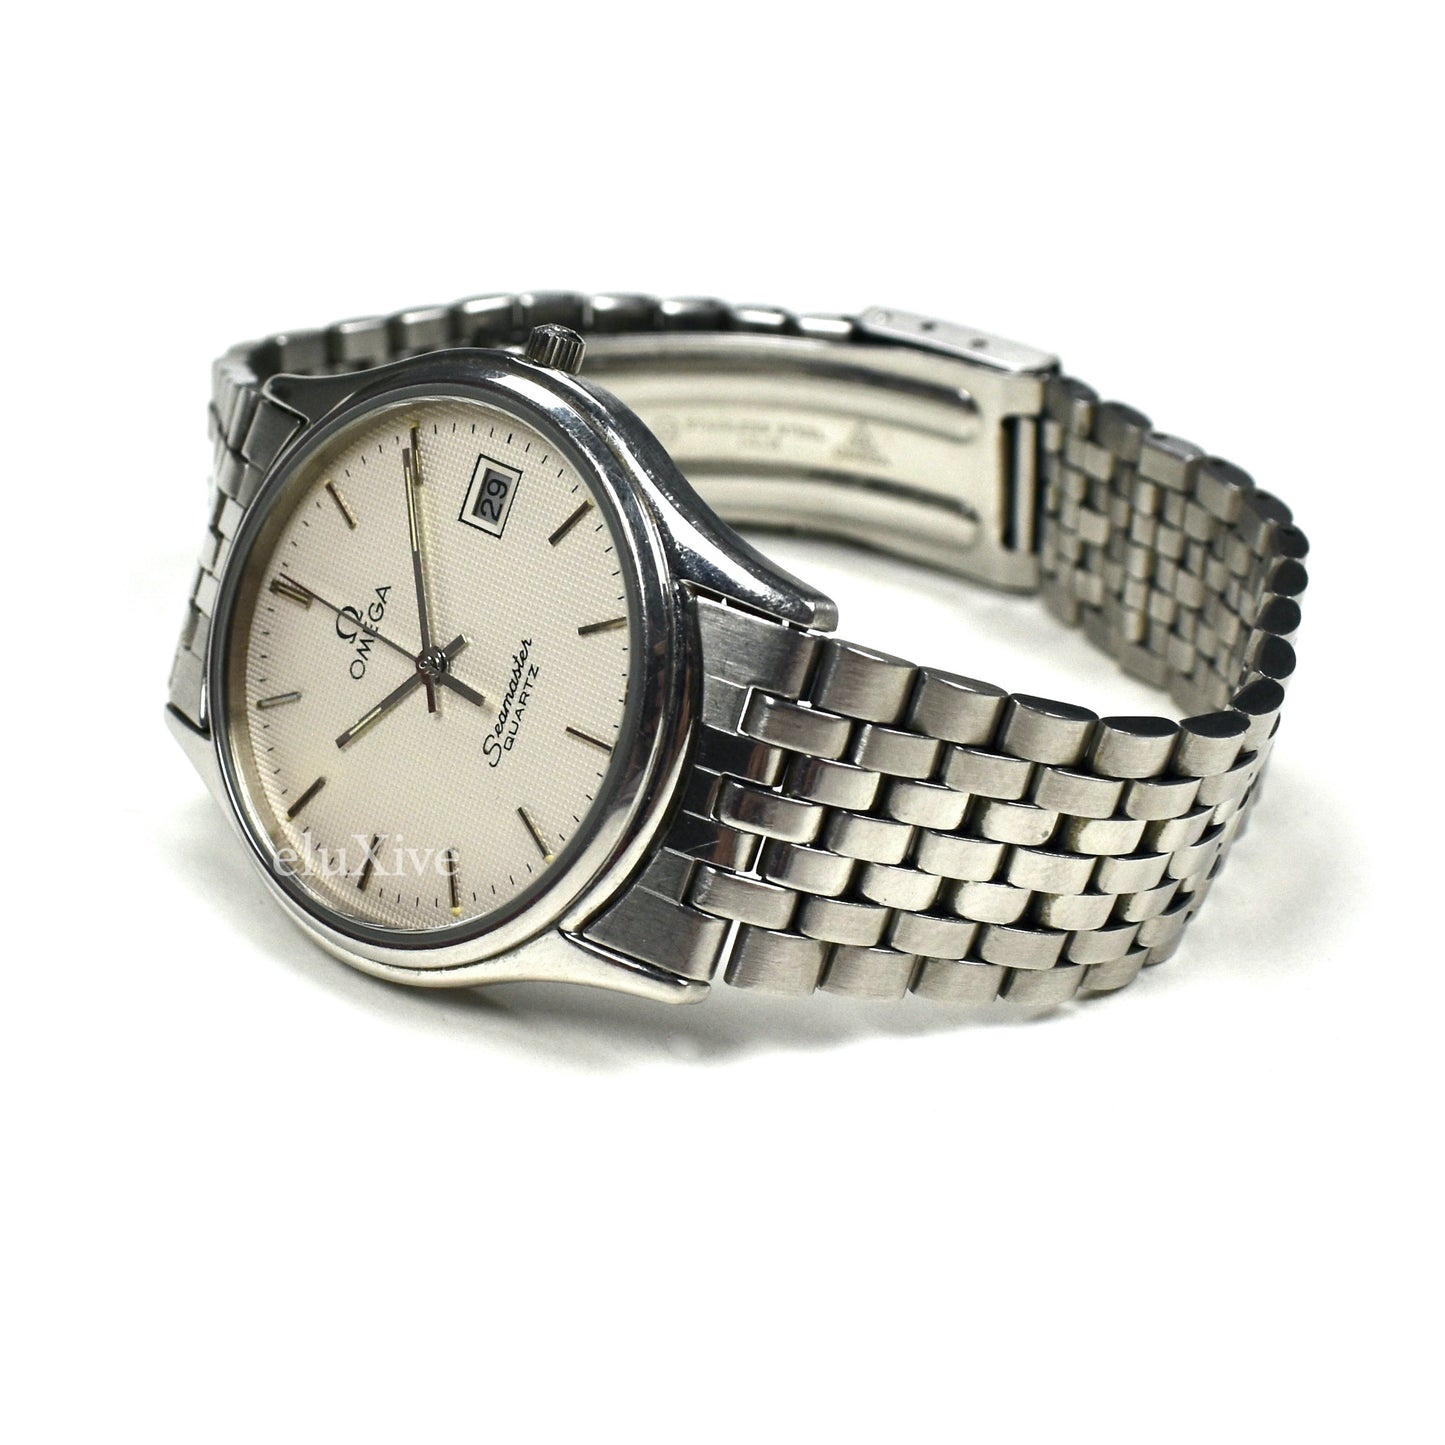 Omega - Seamaster Date 1430 Silver Waffle Dial Watch